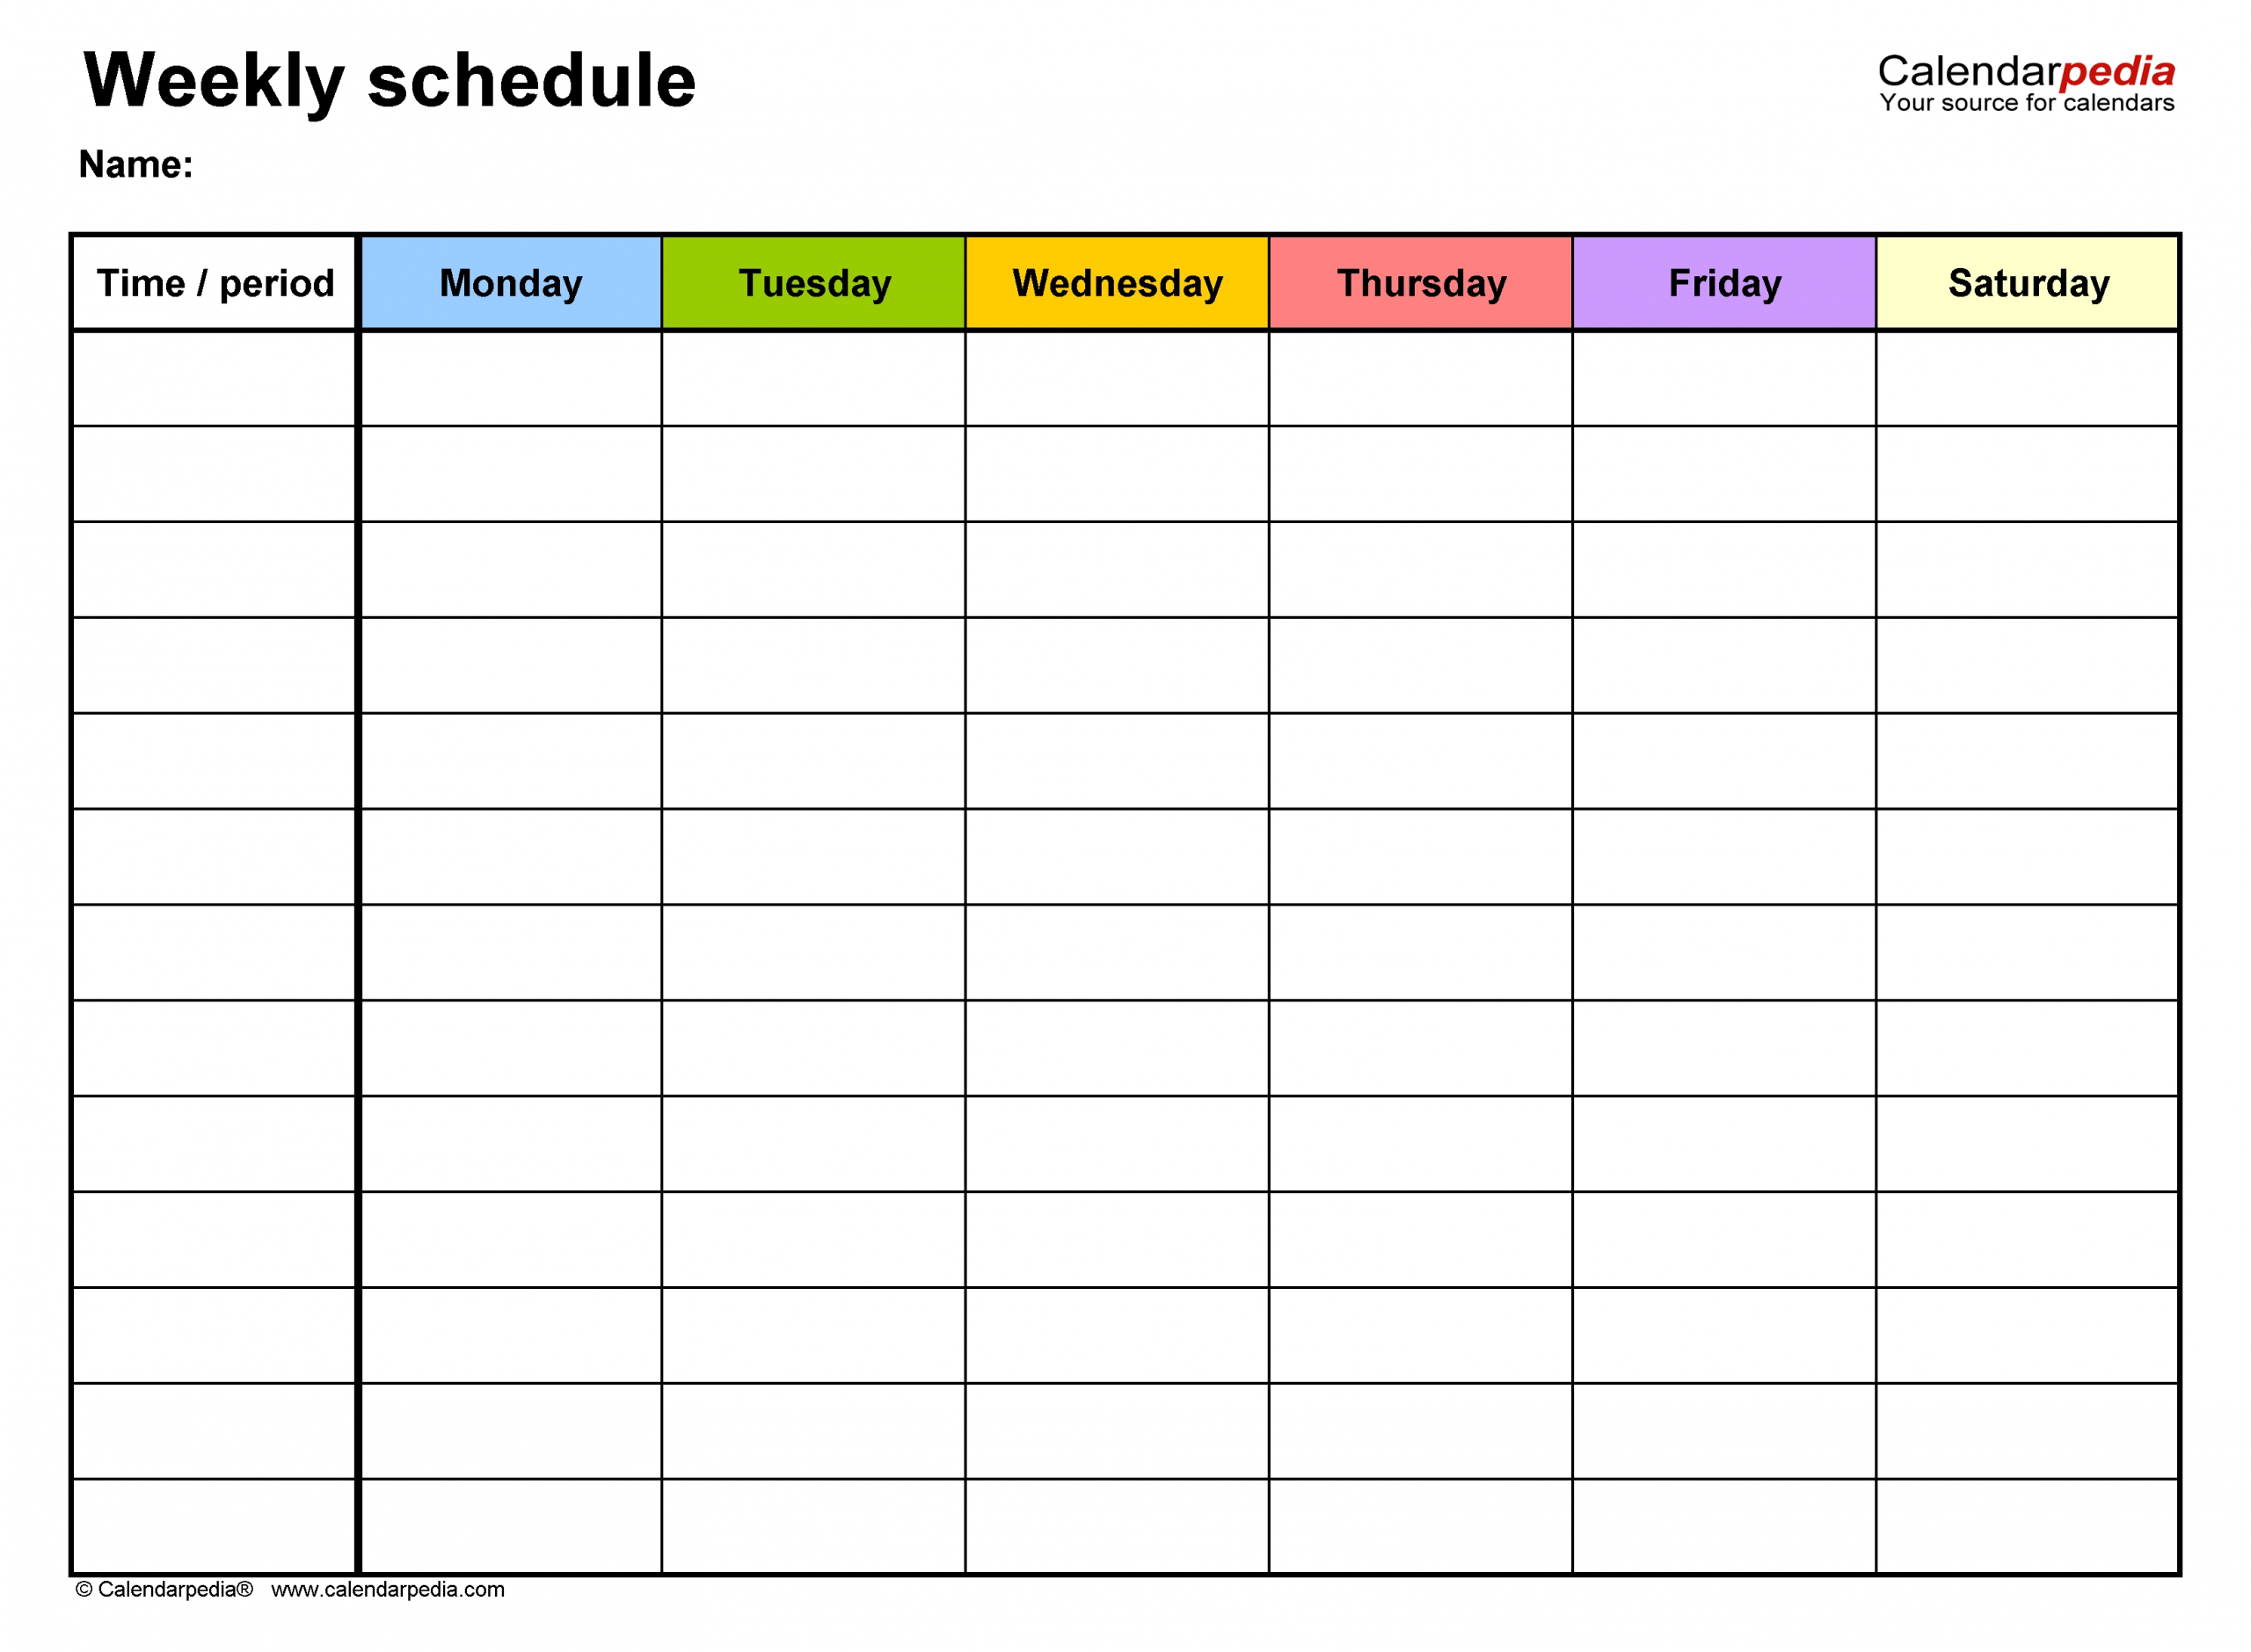 Free Weekly Schedules For Excel - 18 Templates 4 Week Calendar Template Excel